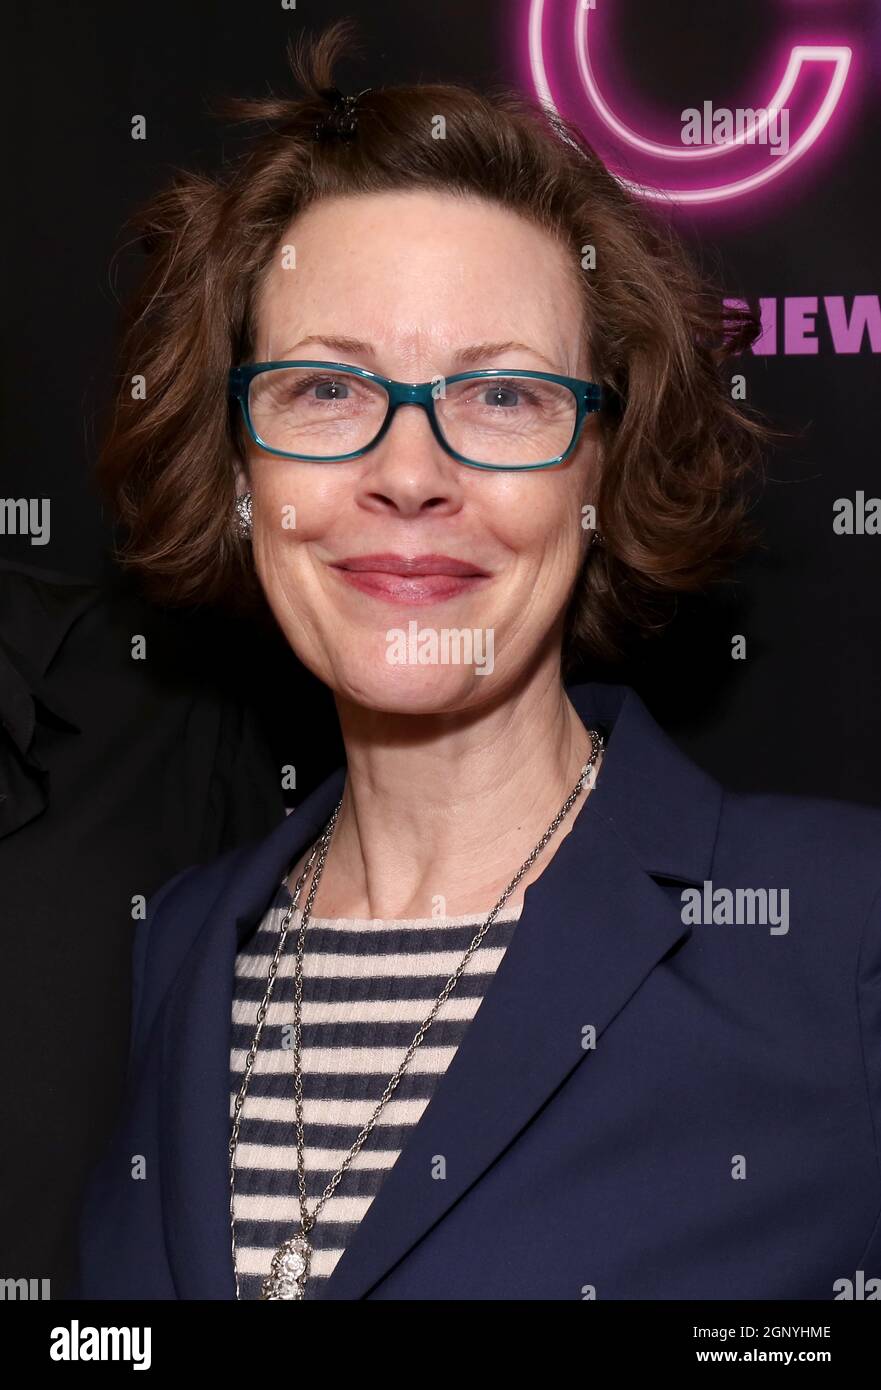 New York, NY, USA. 27th Sep, 2021. Veanne Cox arrives at the opening night of A Commercial Jingle for Regina Comet, held at the DR2 Theatre, on September 27, 2021, in New York City. Credit: Joseph Marzullo/Media Punch/Alamy Live News Stock Photo